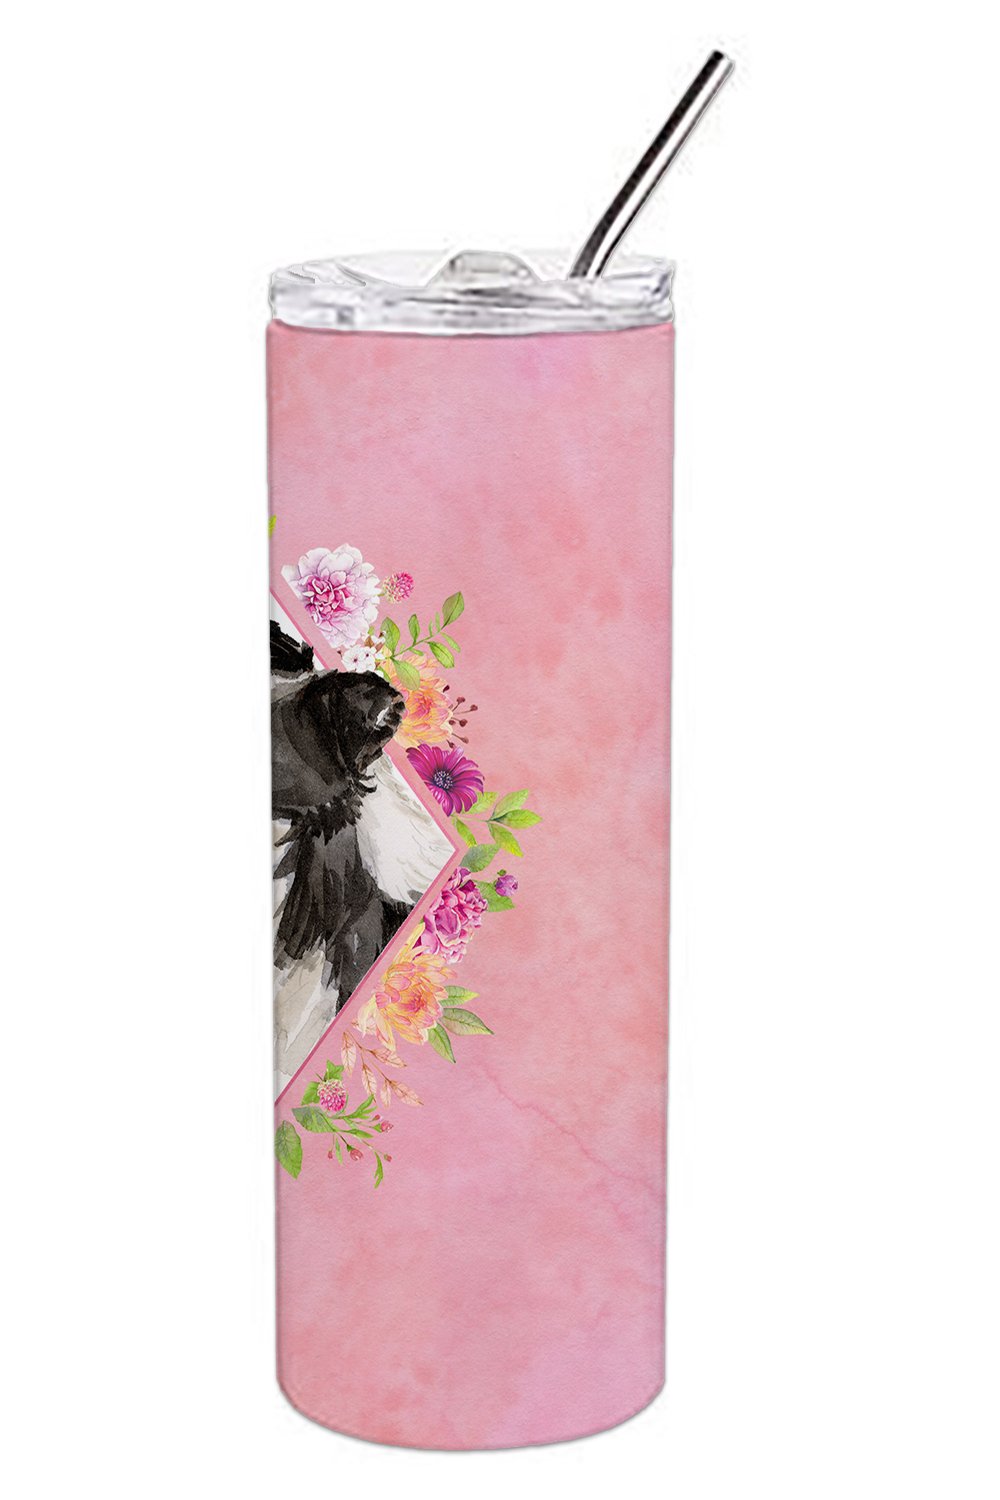 Border Collie Pink Flowers Double Walled Stainless Steel 20 oz Skinny Tumbler CK4258TBL20 by Caroline's Treasures